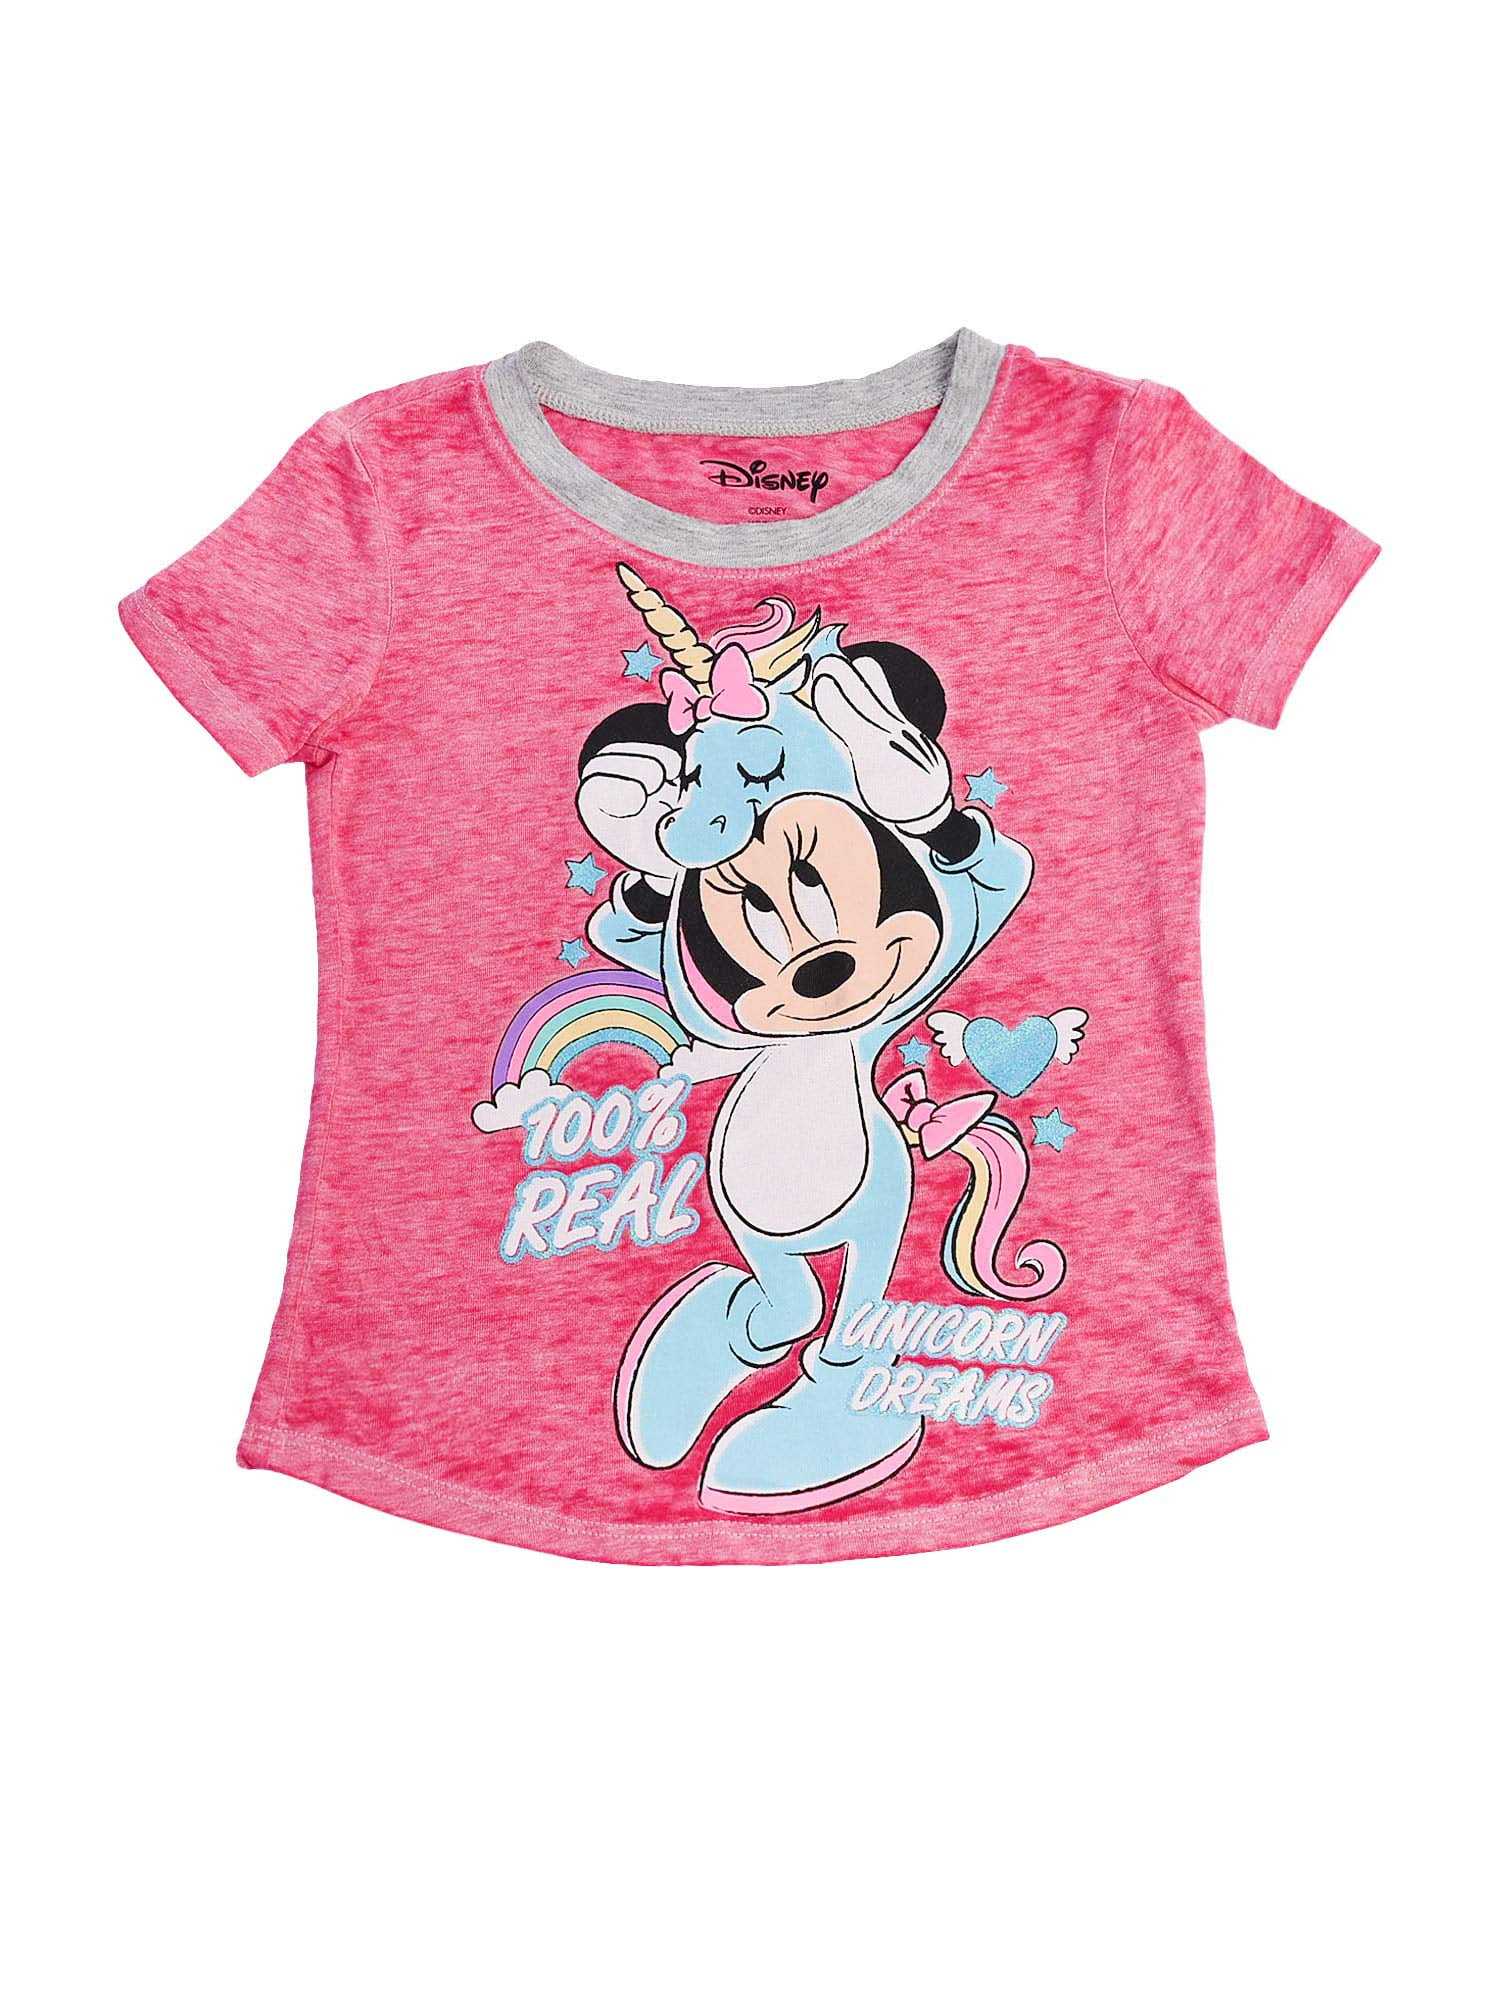 Girls Disney Minnie Mouse Girls Pink T-Shirt Top Age 2-11 Years Disney Store 